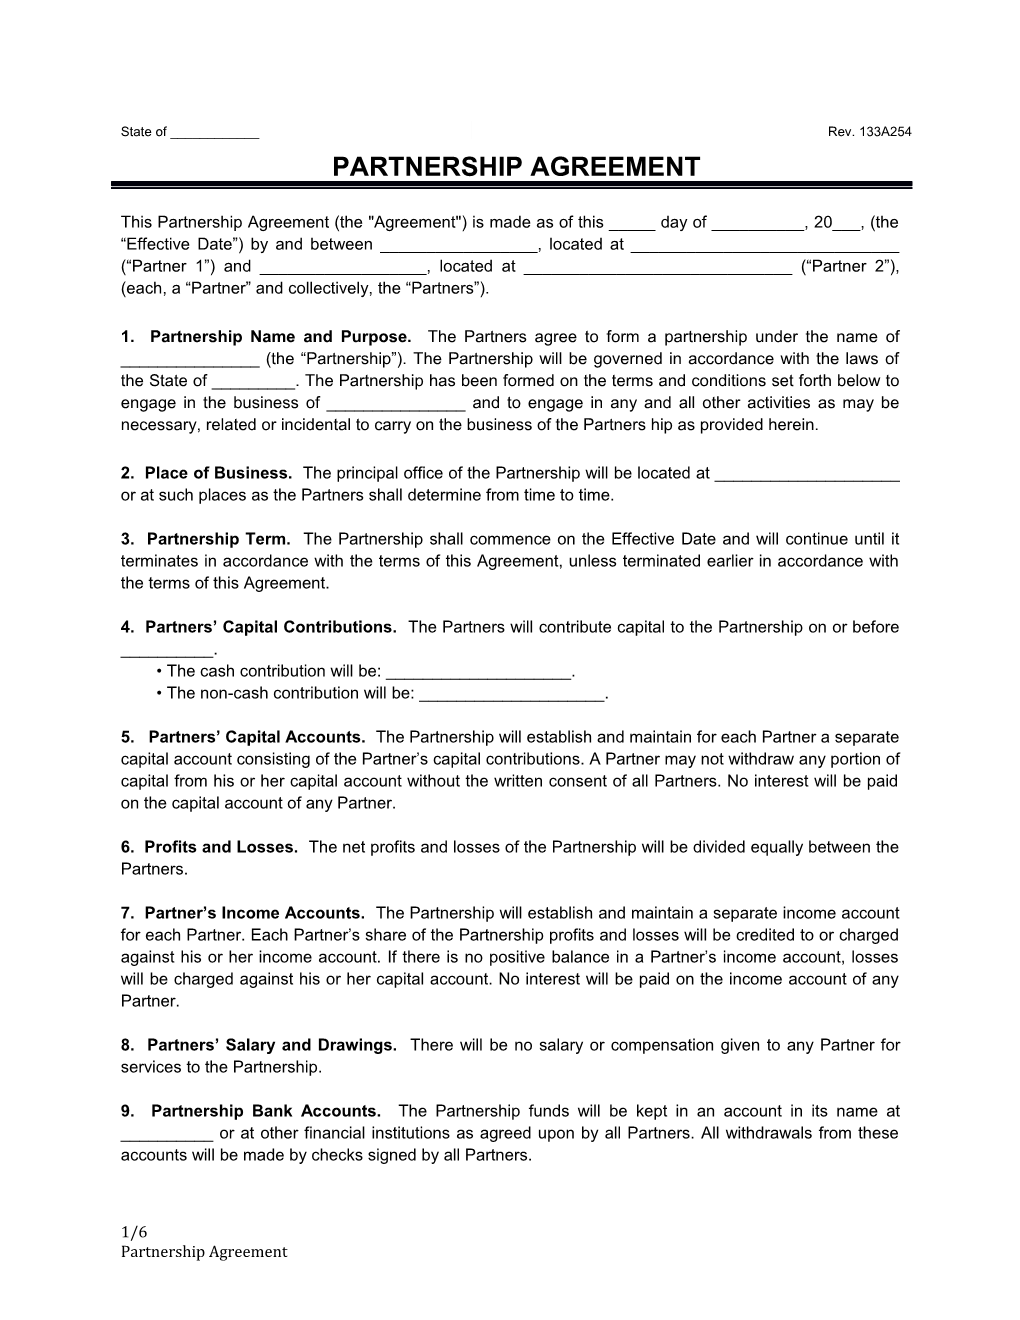 This Partnership Agreement (The Agreement ) Is Made As of This _____ Day of ______, 20___